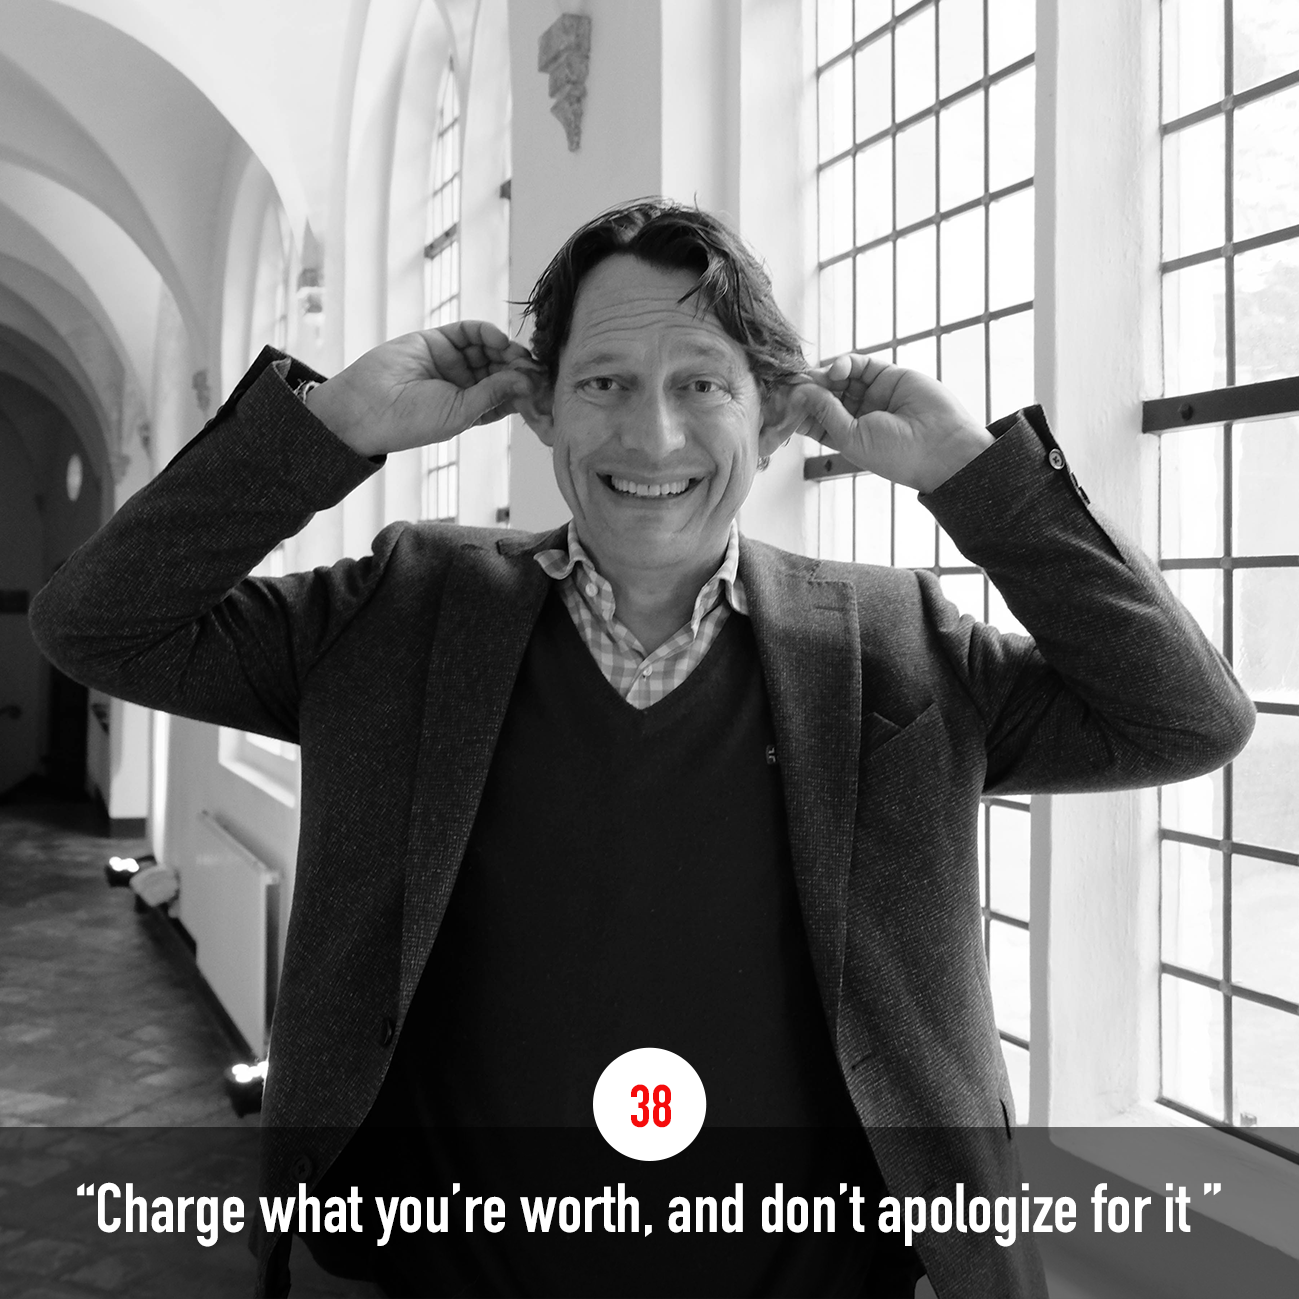 CHARGE WHAT YOU’RE WORTH AND DON’T APOLOGIZE FOR IT